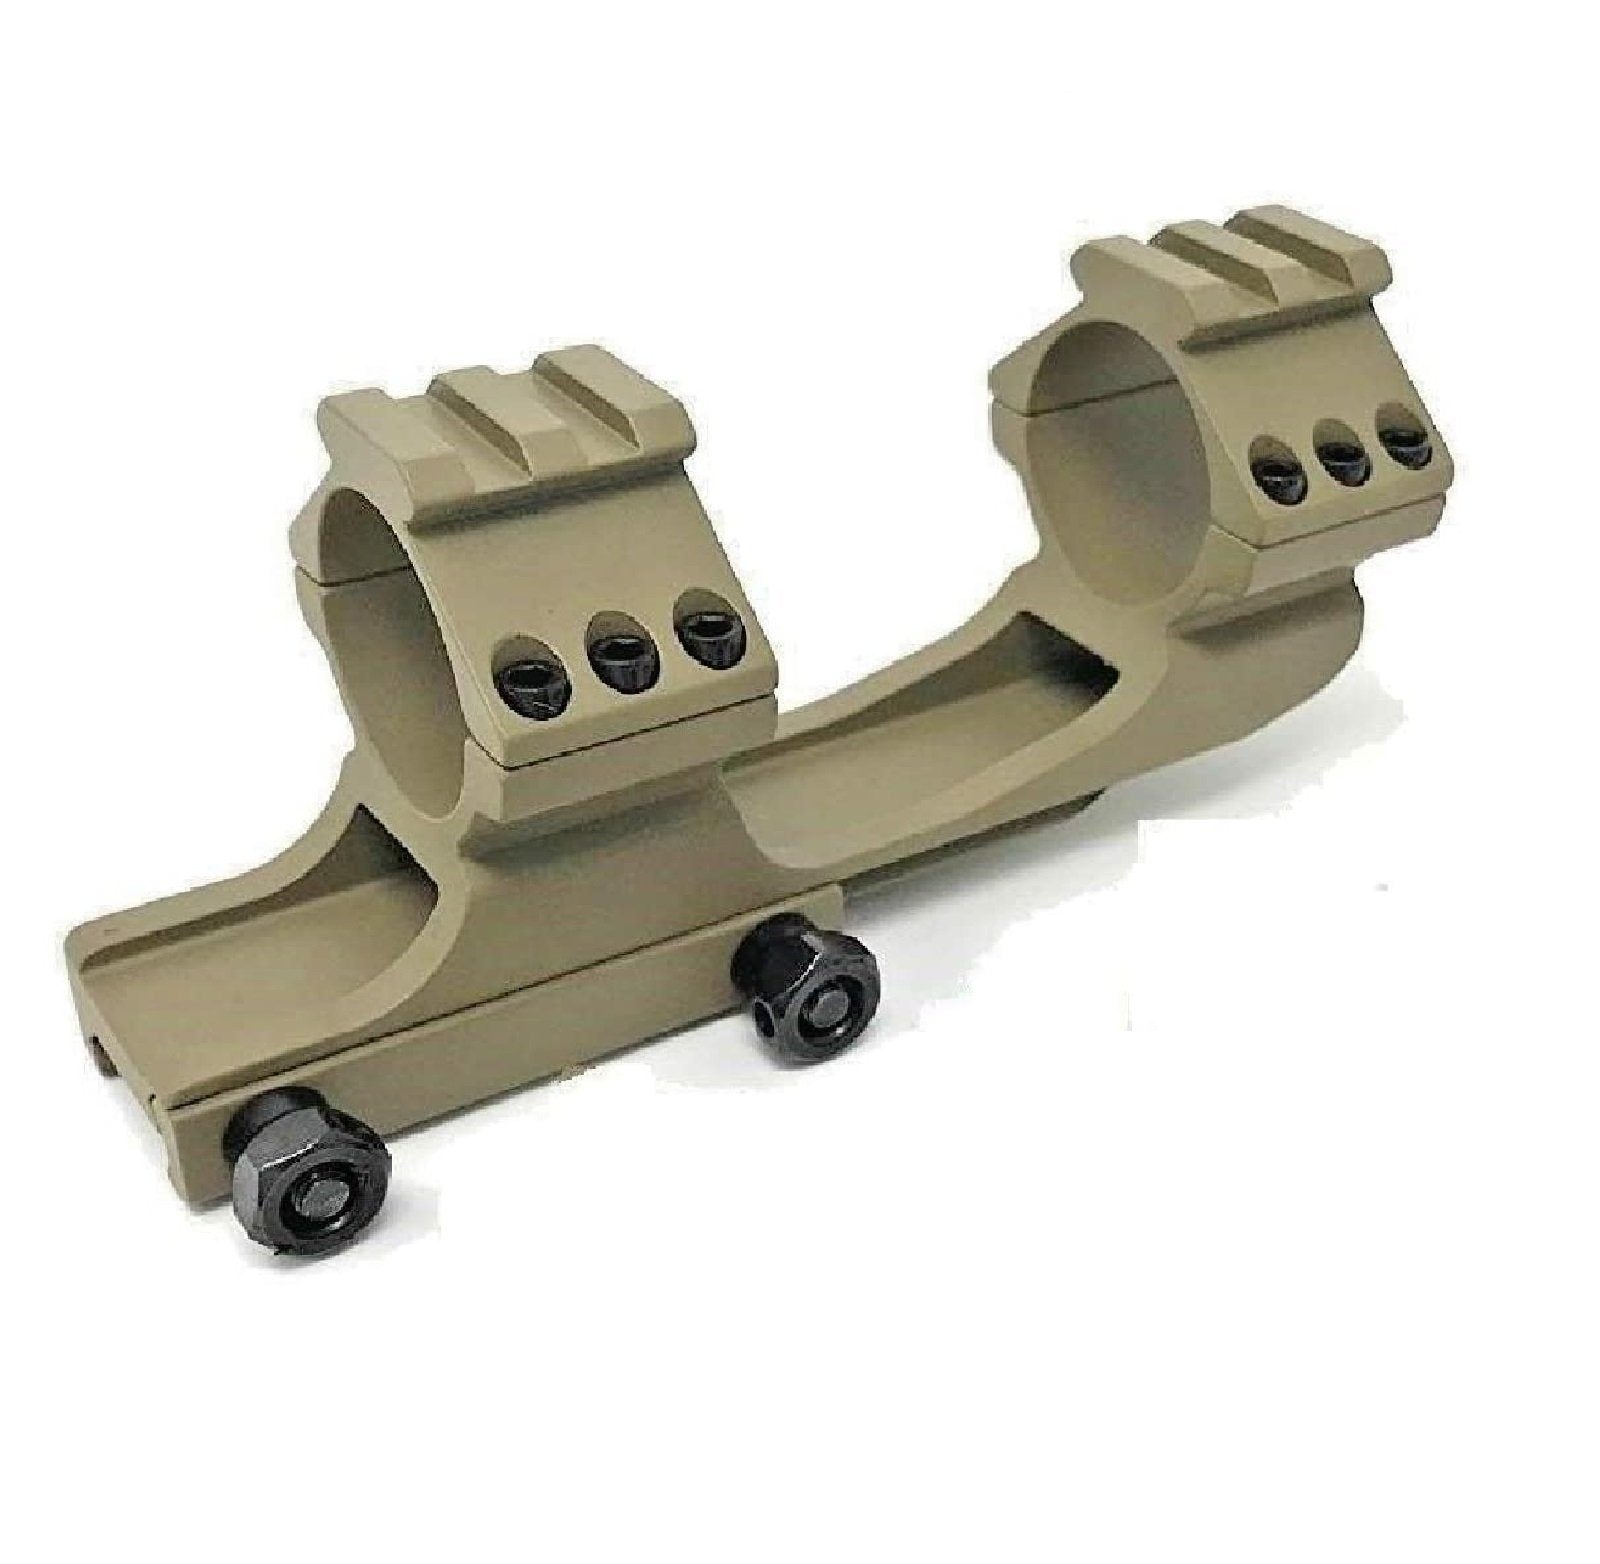 Dark Earth Cantilever Dual Ring Scope Mount 30mm with 1" Removable Inserts Scope Mounts Green Blob Outdoors 